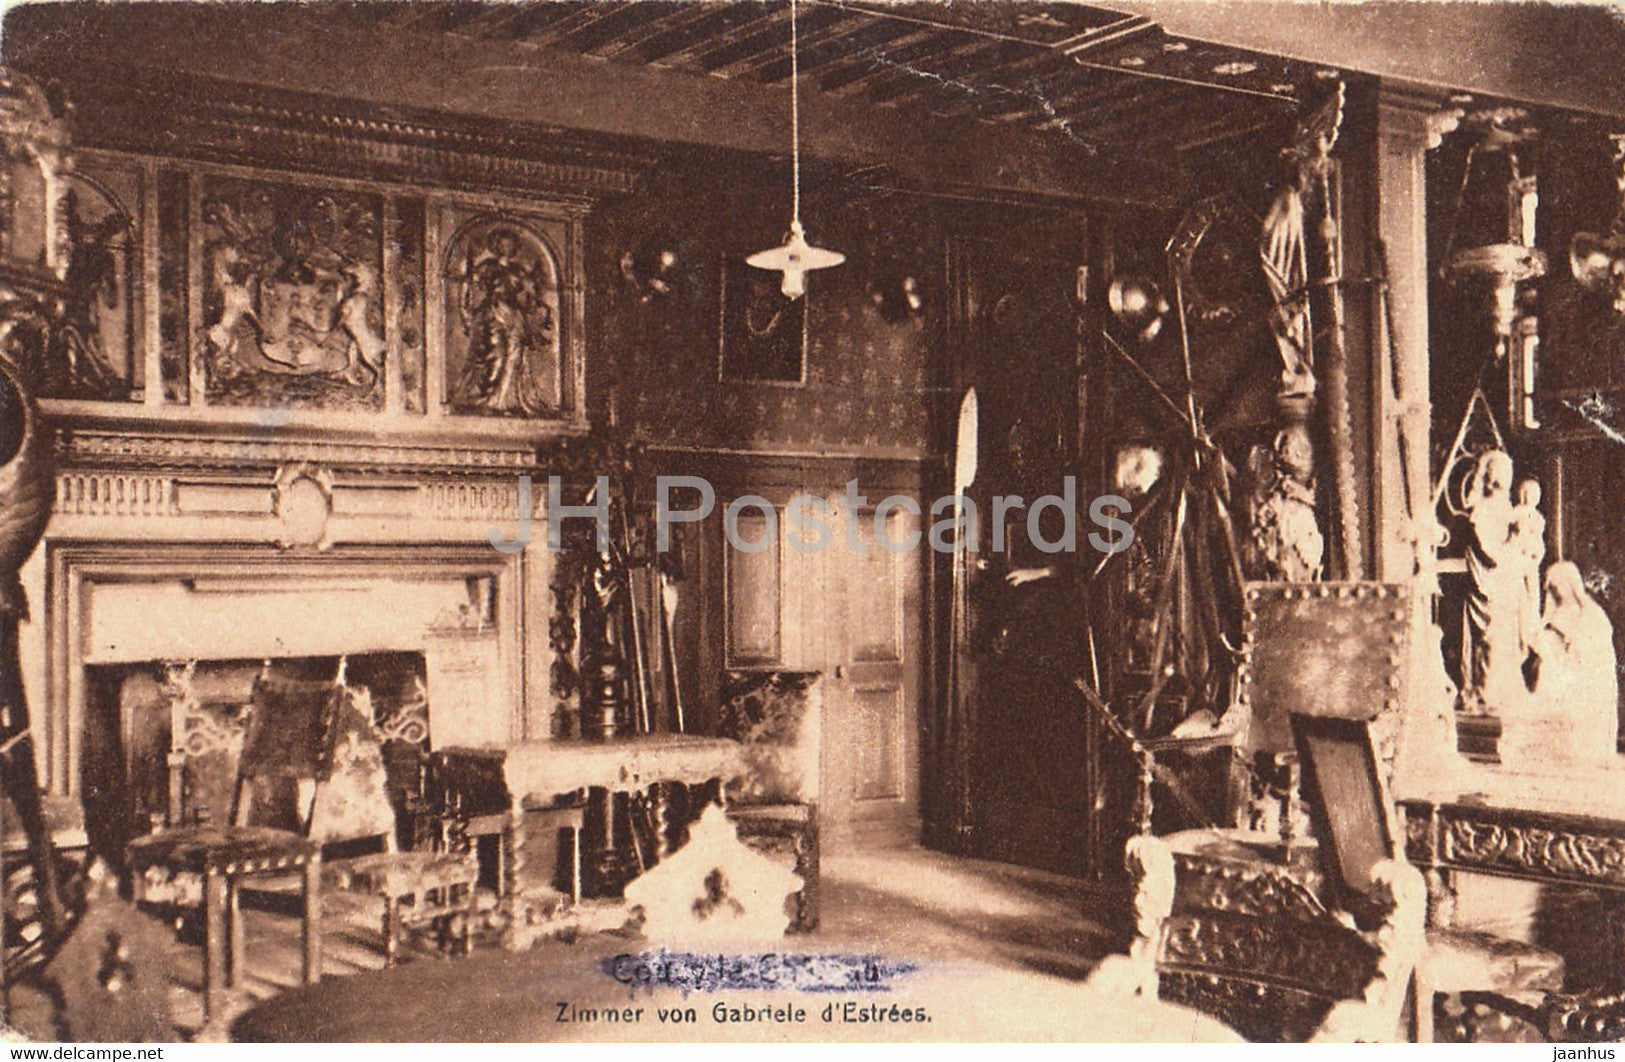 Couchy le Chateau - Zimmer von Gabriele d'Estrees - castle - Feldpost - old postcard - 1916 - France - used - JH Postcards